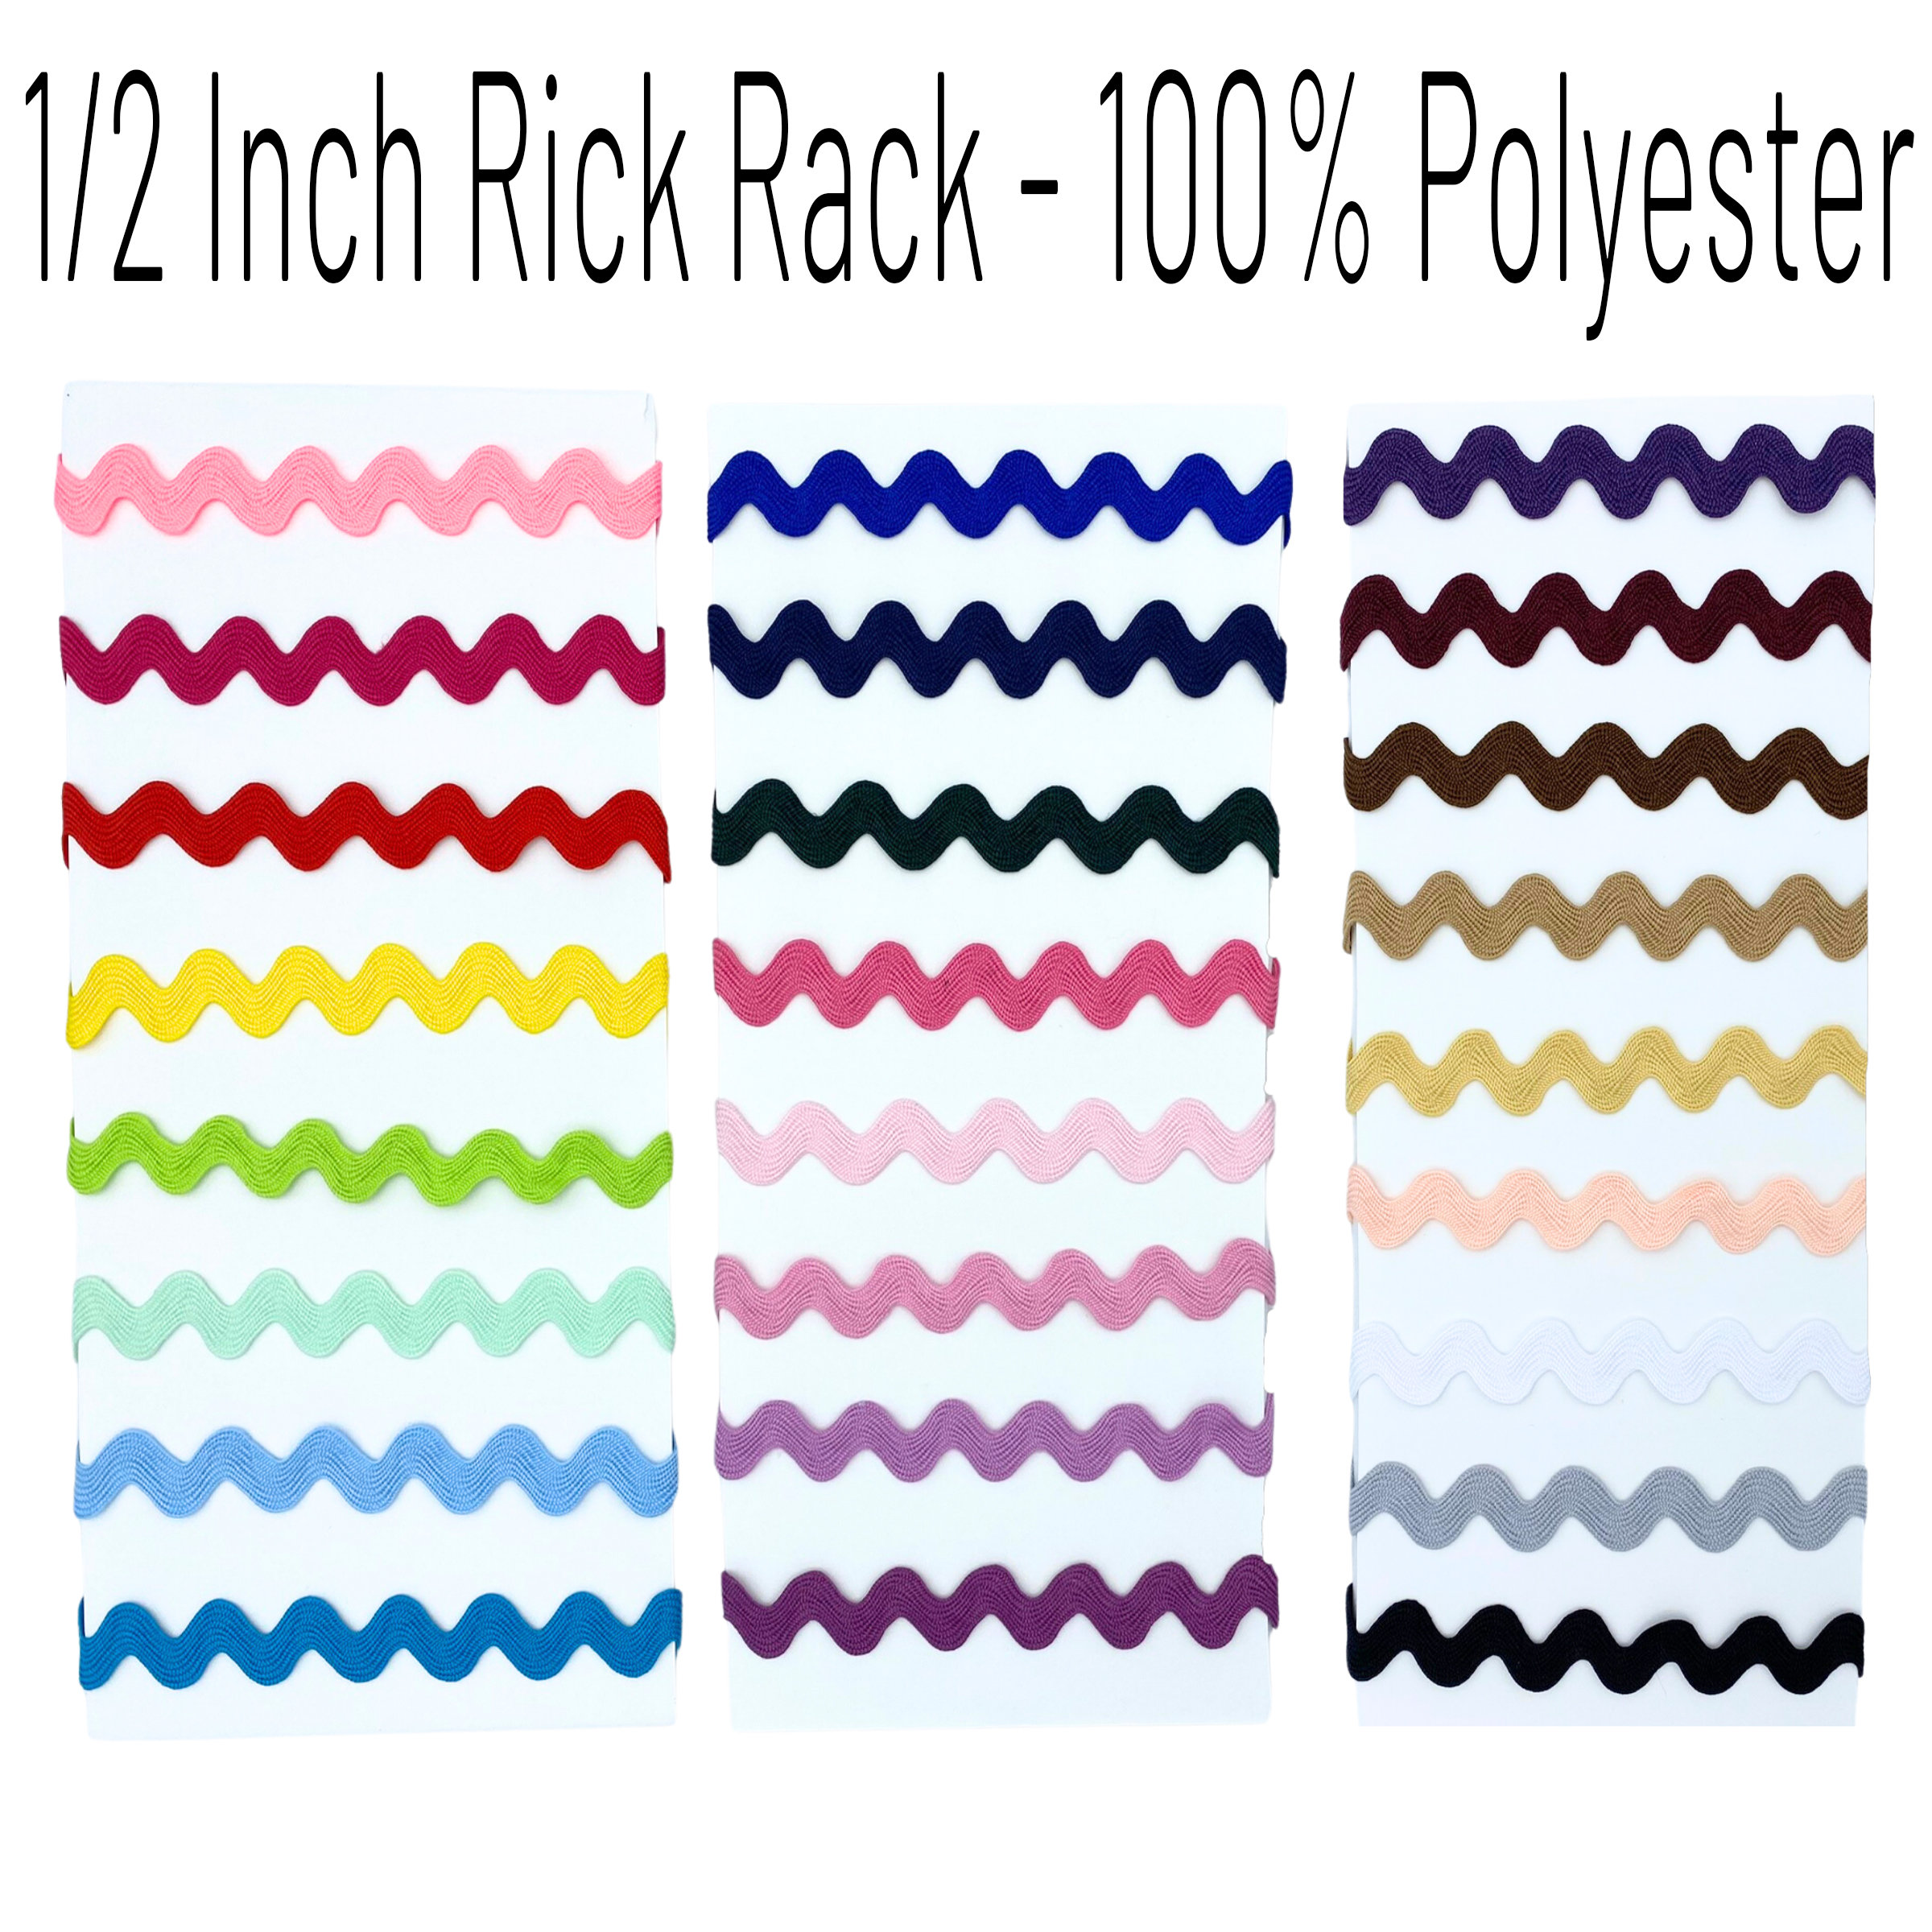 Rick Rack Wave Bending Fringe Trim 40 Yards White Lace Ribbon RIC Rack Trim  for Christmas Sewing Clothes Gift Wrapping Home Party Decoration